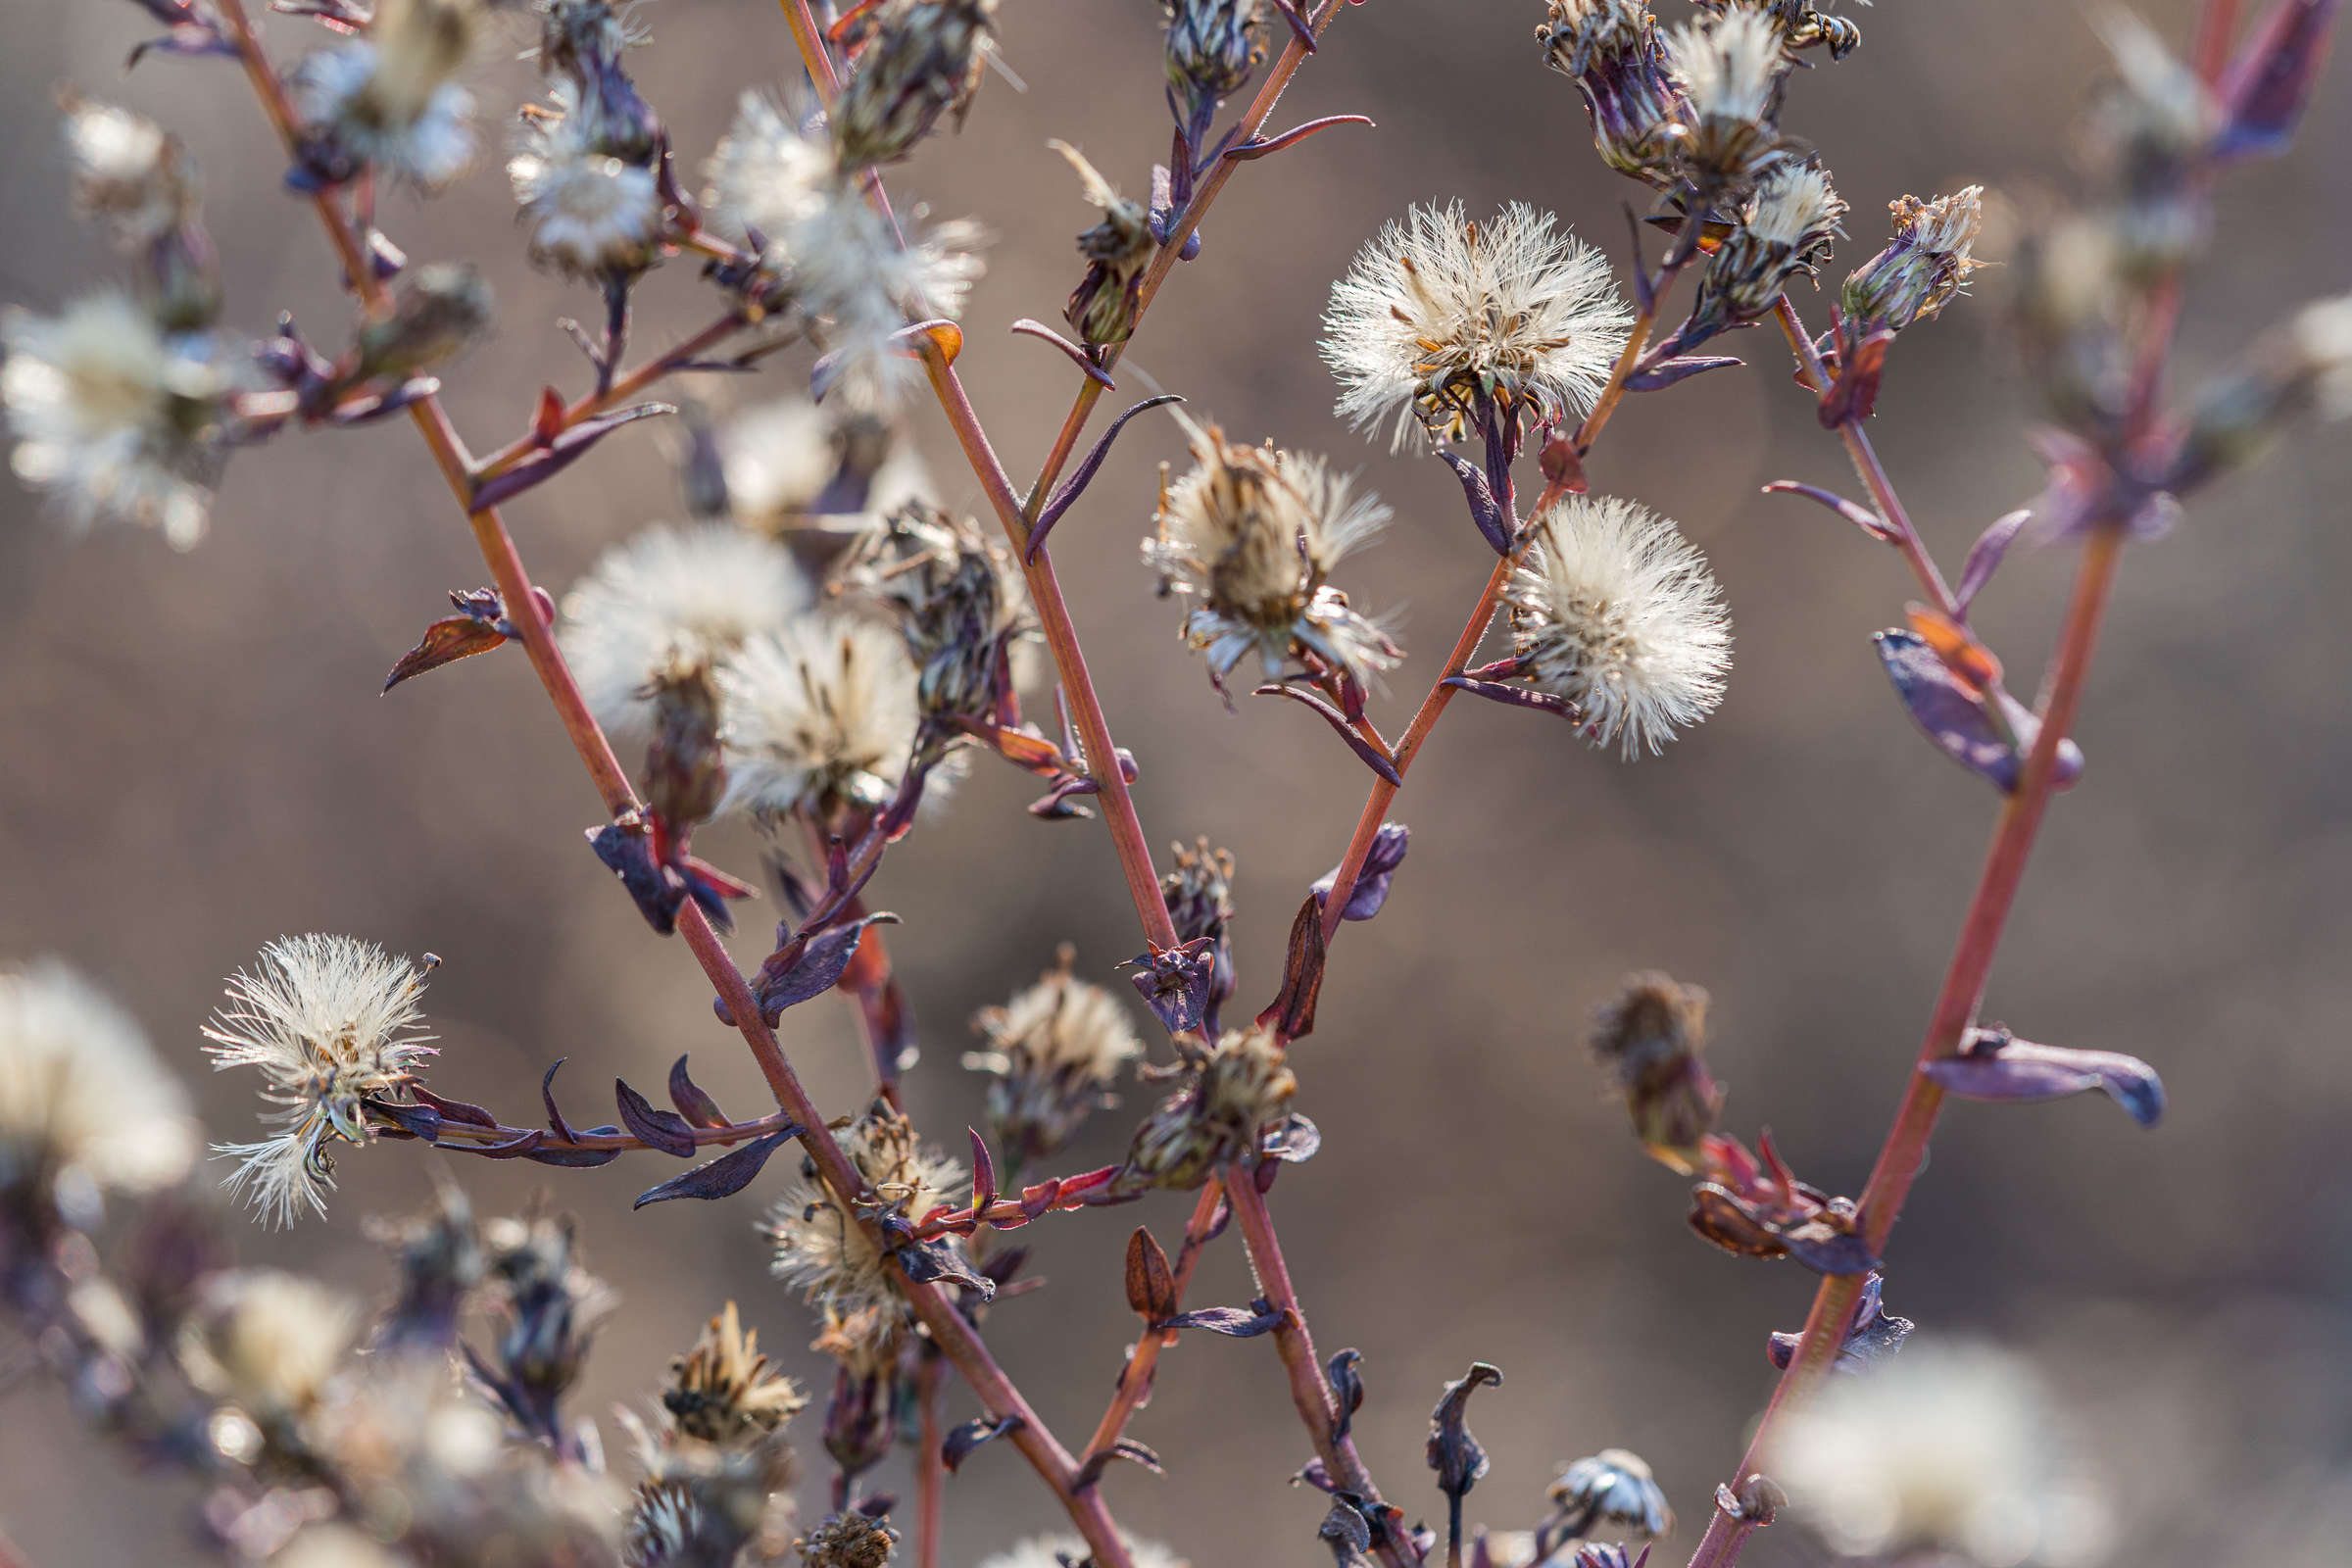 A series of dry seed heads with puffs of white emerging from their tops